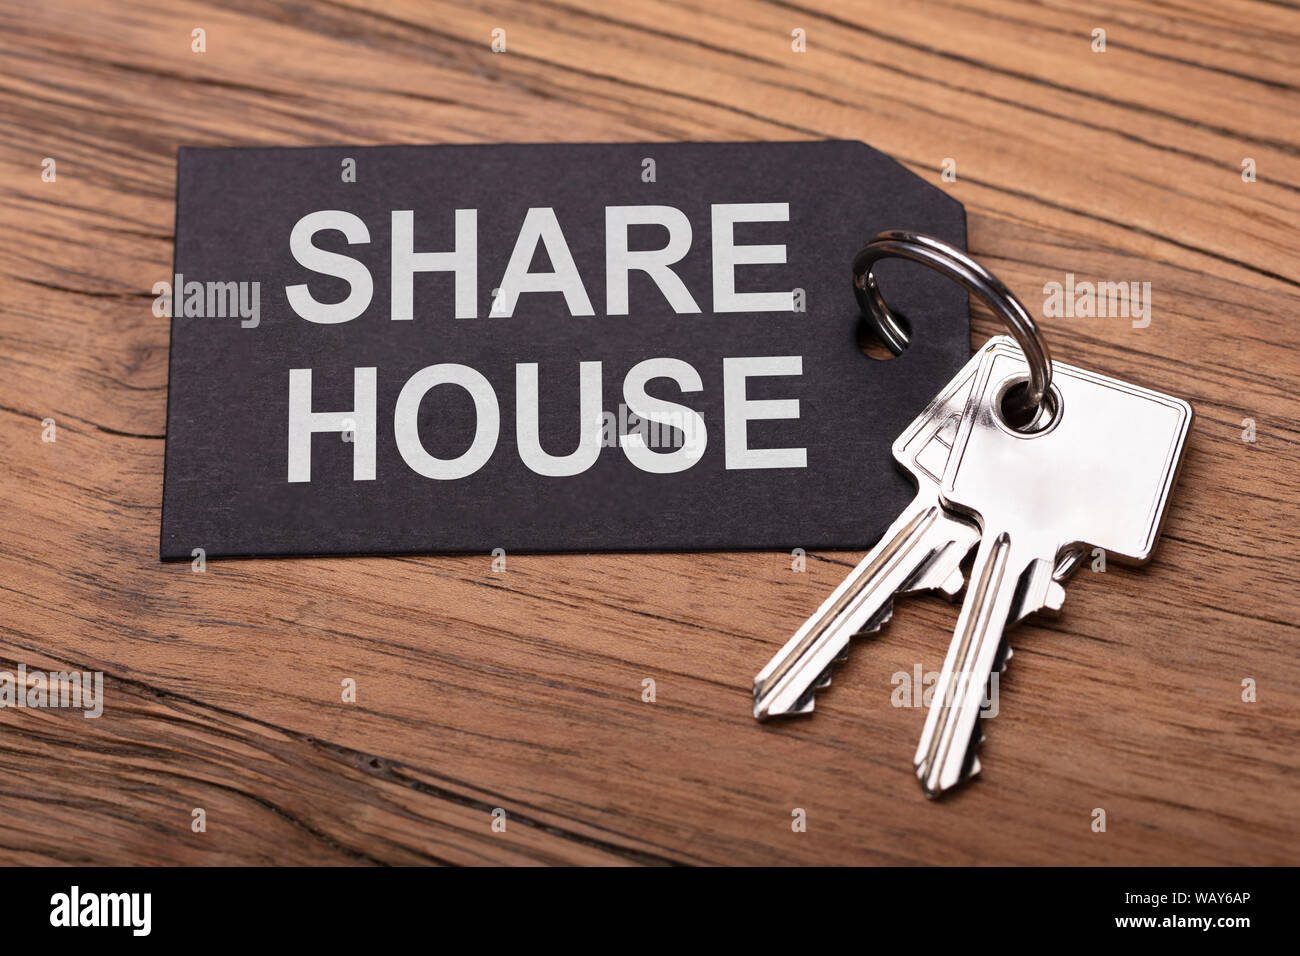 Share House Keys With Black Keychain On Wooden Desk Stock Photo